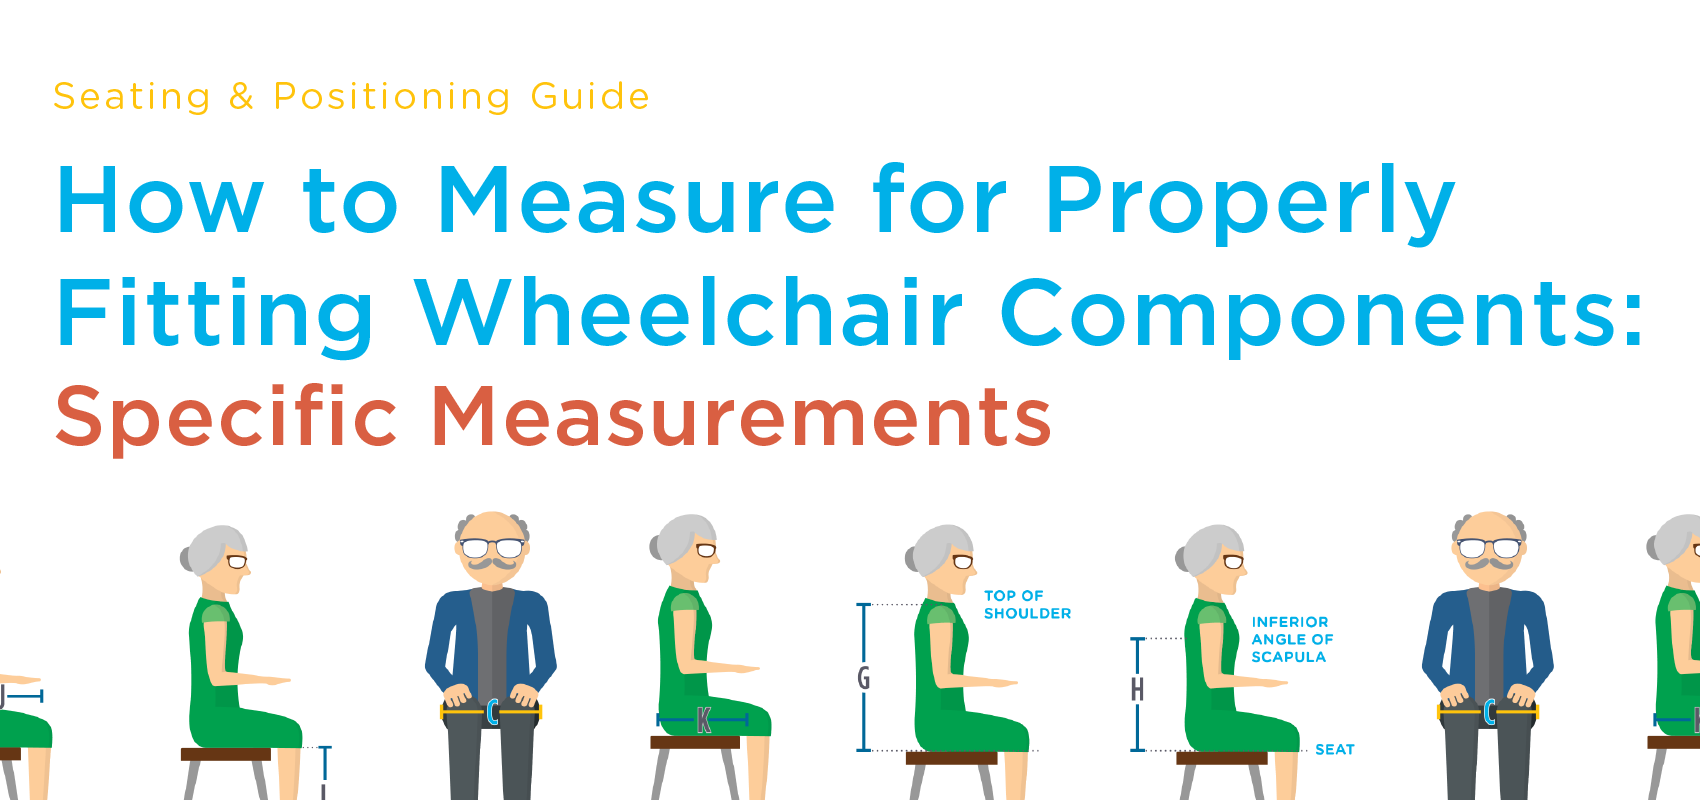 Wheelchair User Average Height - Height While Seated in Chairs